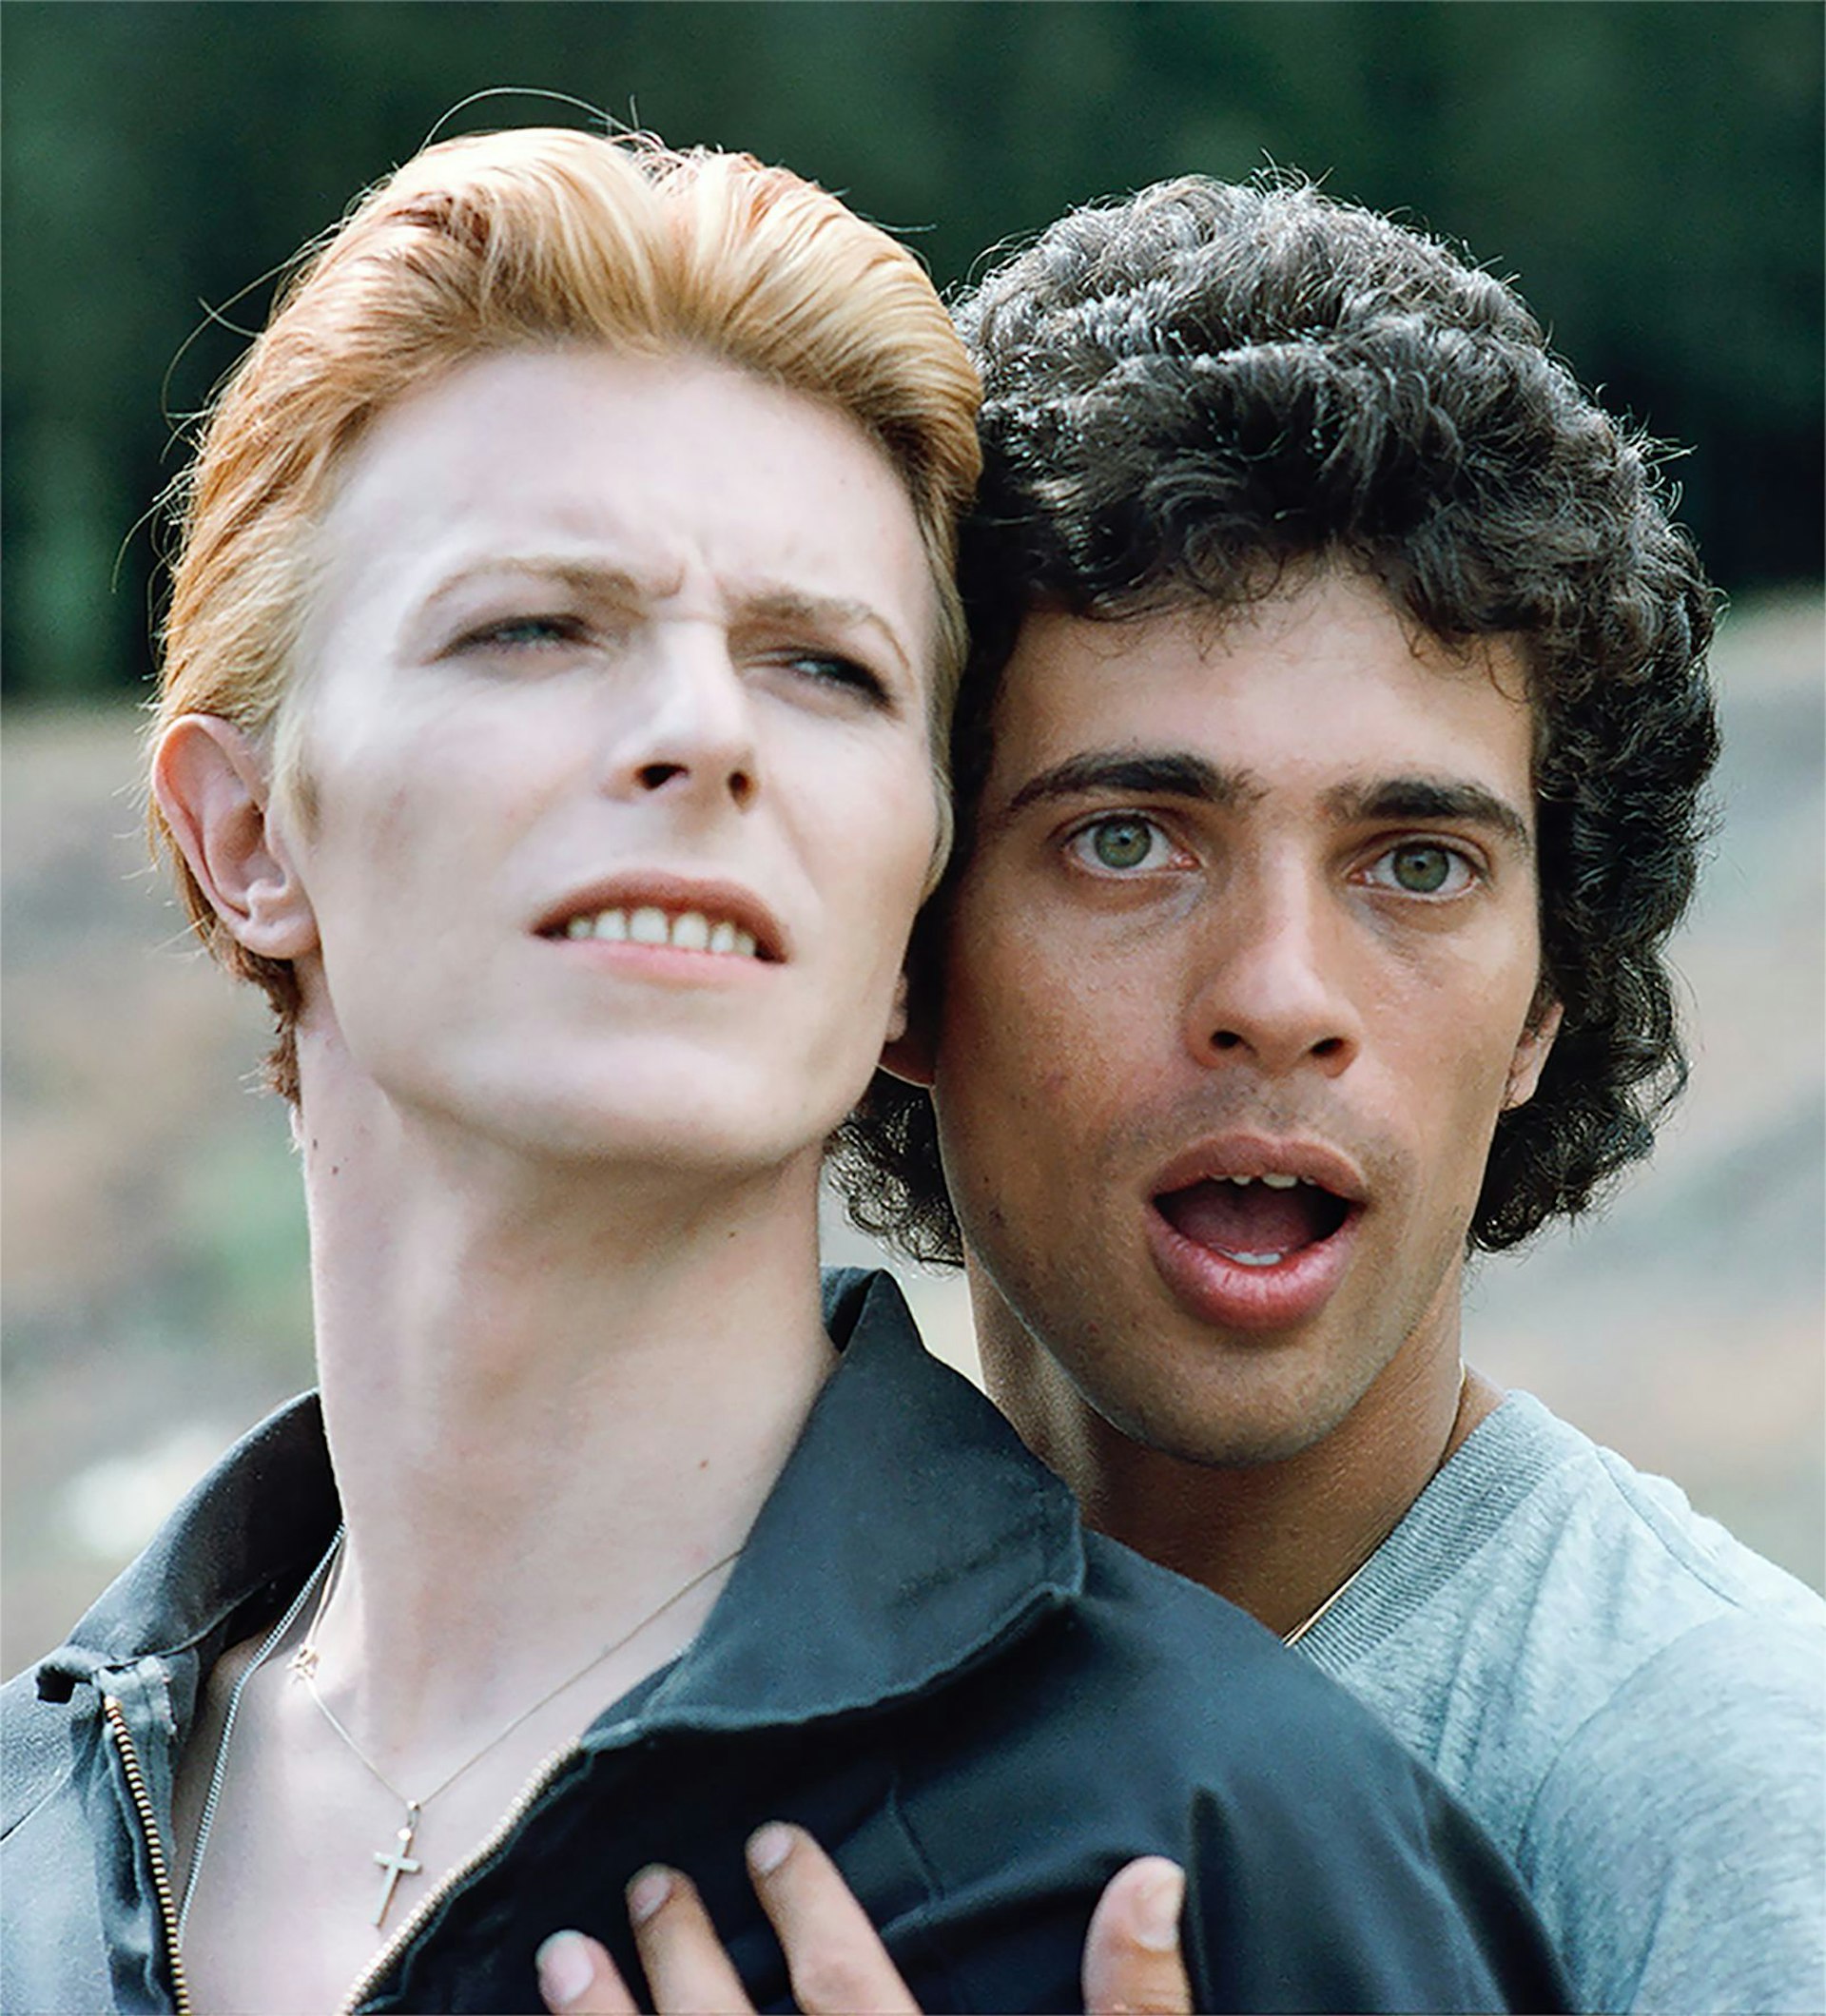 A lifelong friendship with David Bowie – In photos